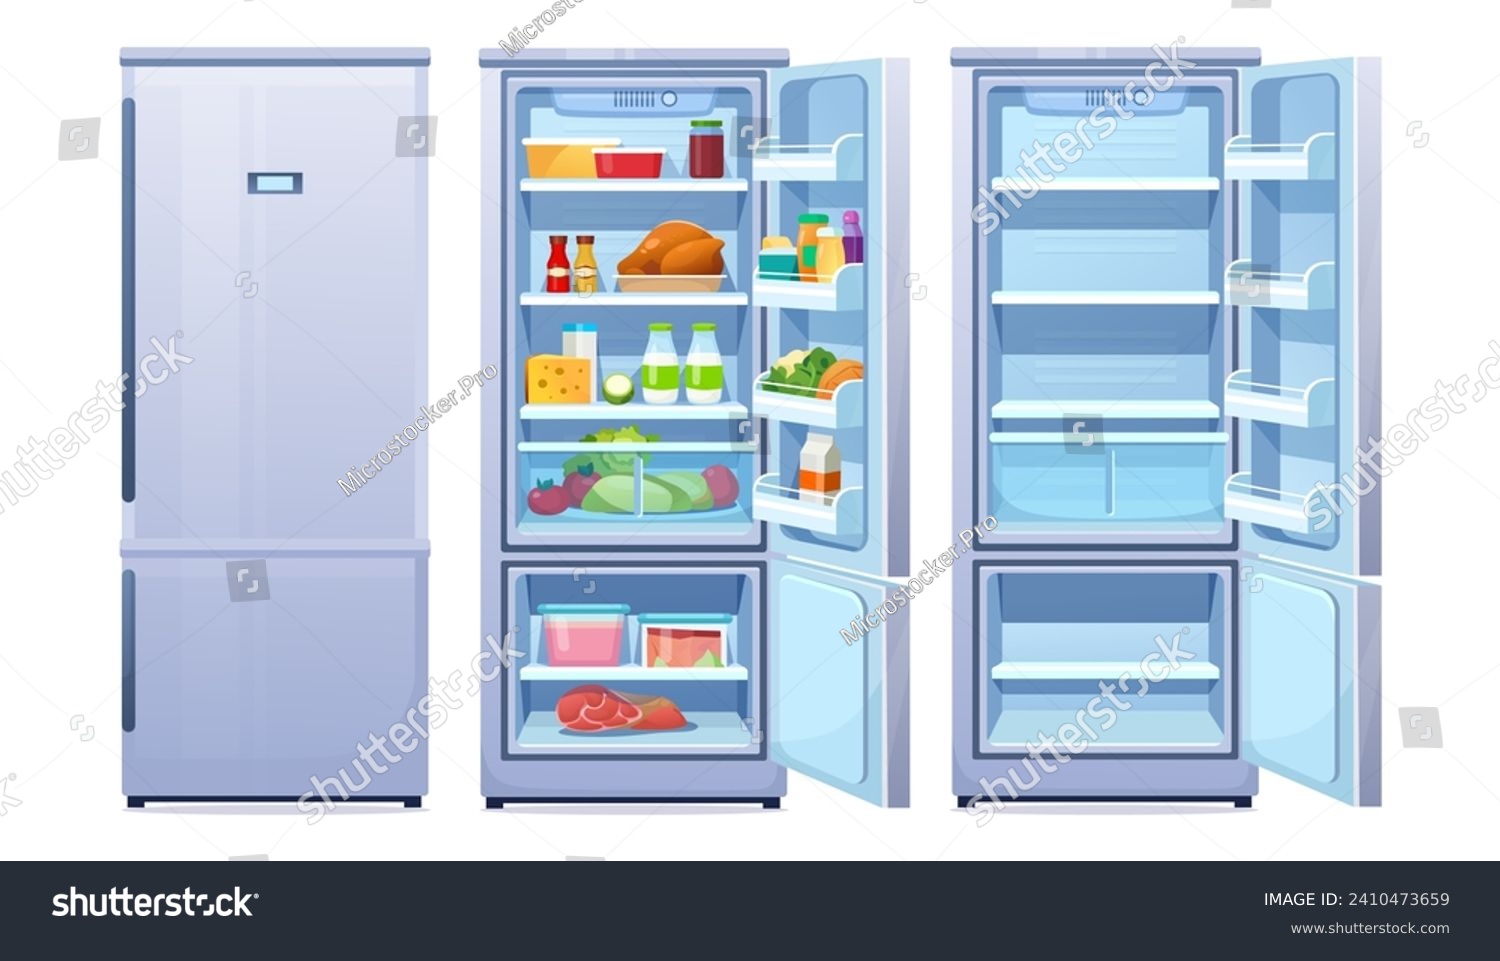 SVG of Cartoon fridge vector set. Flat style illustration with open and closed refrigerator with full and empty shelves. Front View of blue freezer with healthy food chicken, meat, fruits, milk, vegetables. svg